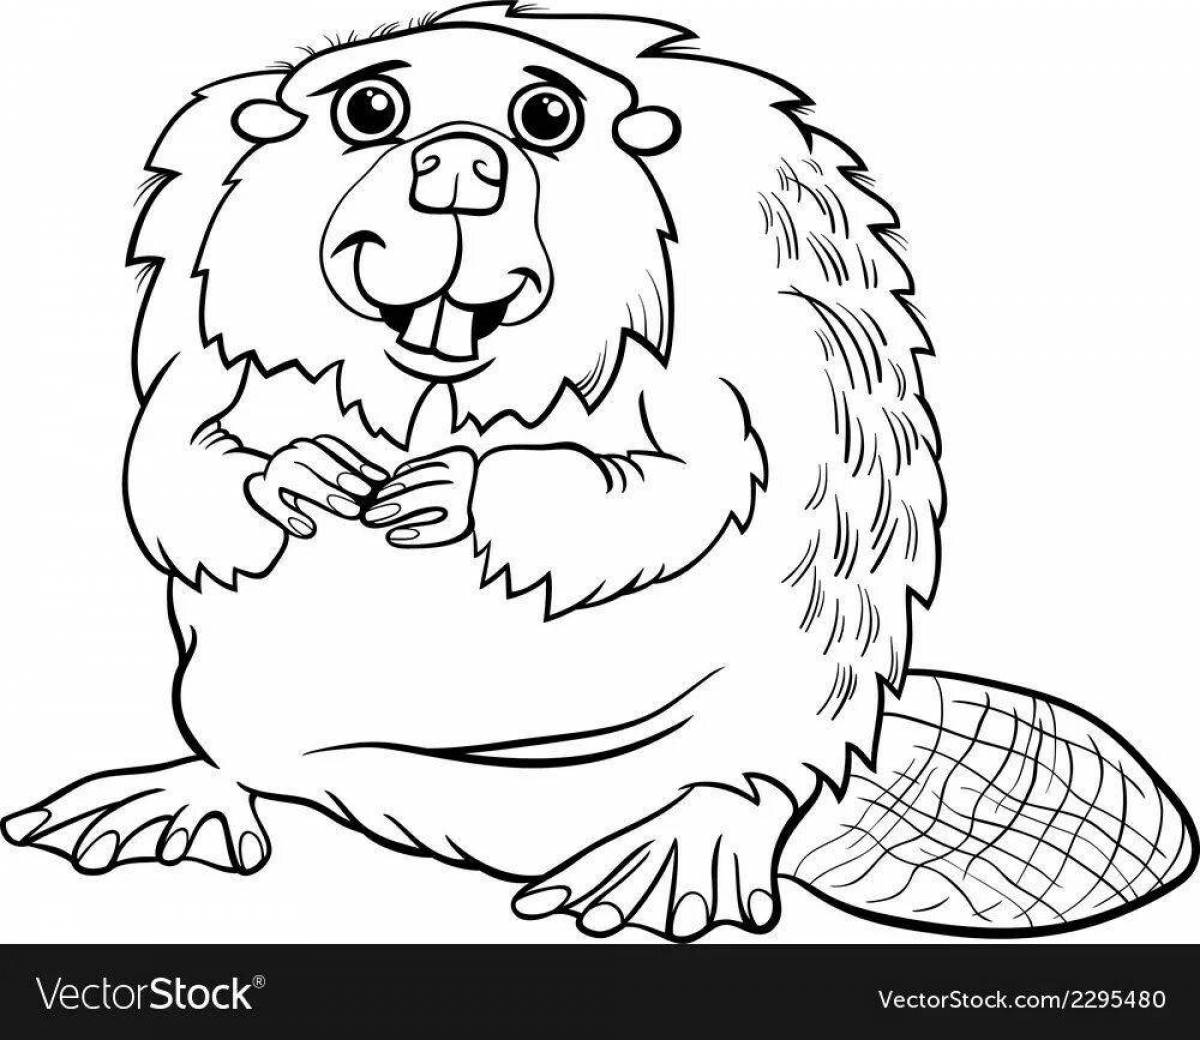 Exquisite beaver coloring book for kids